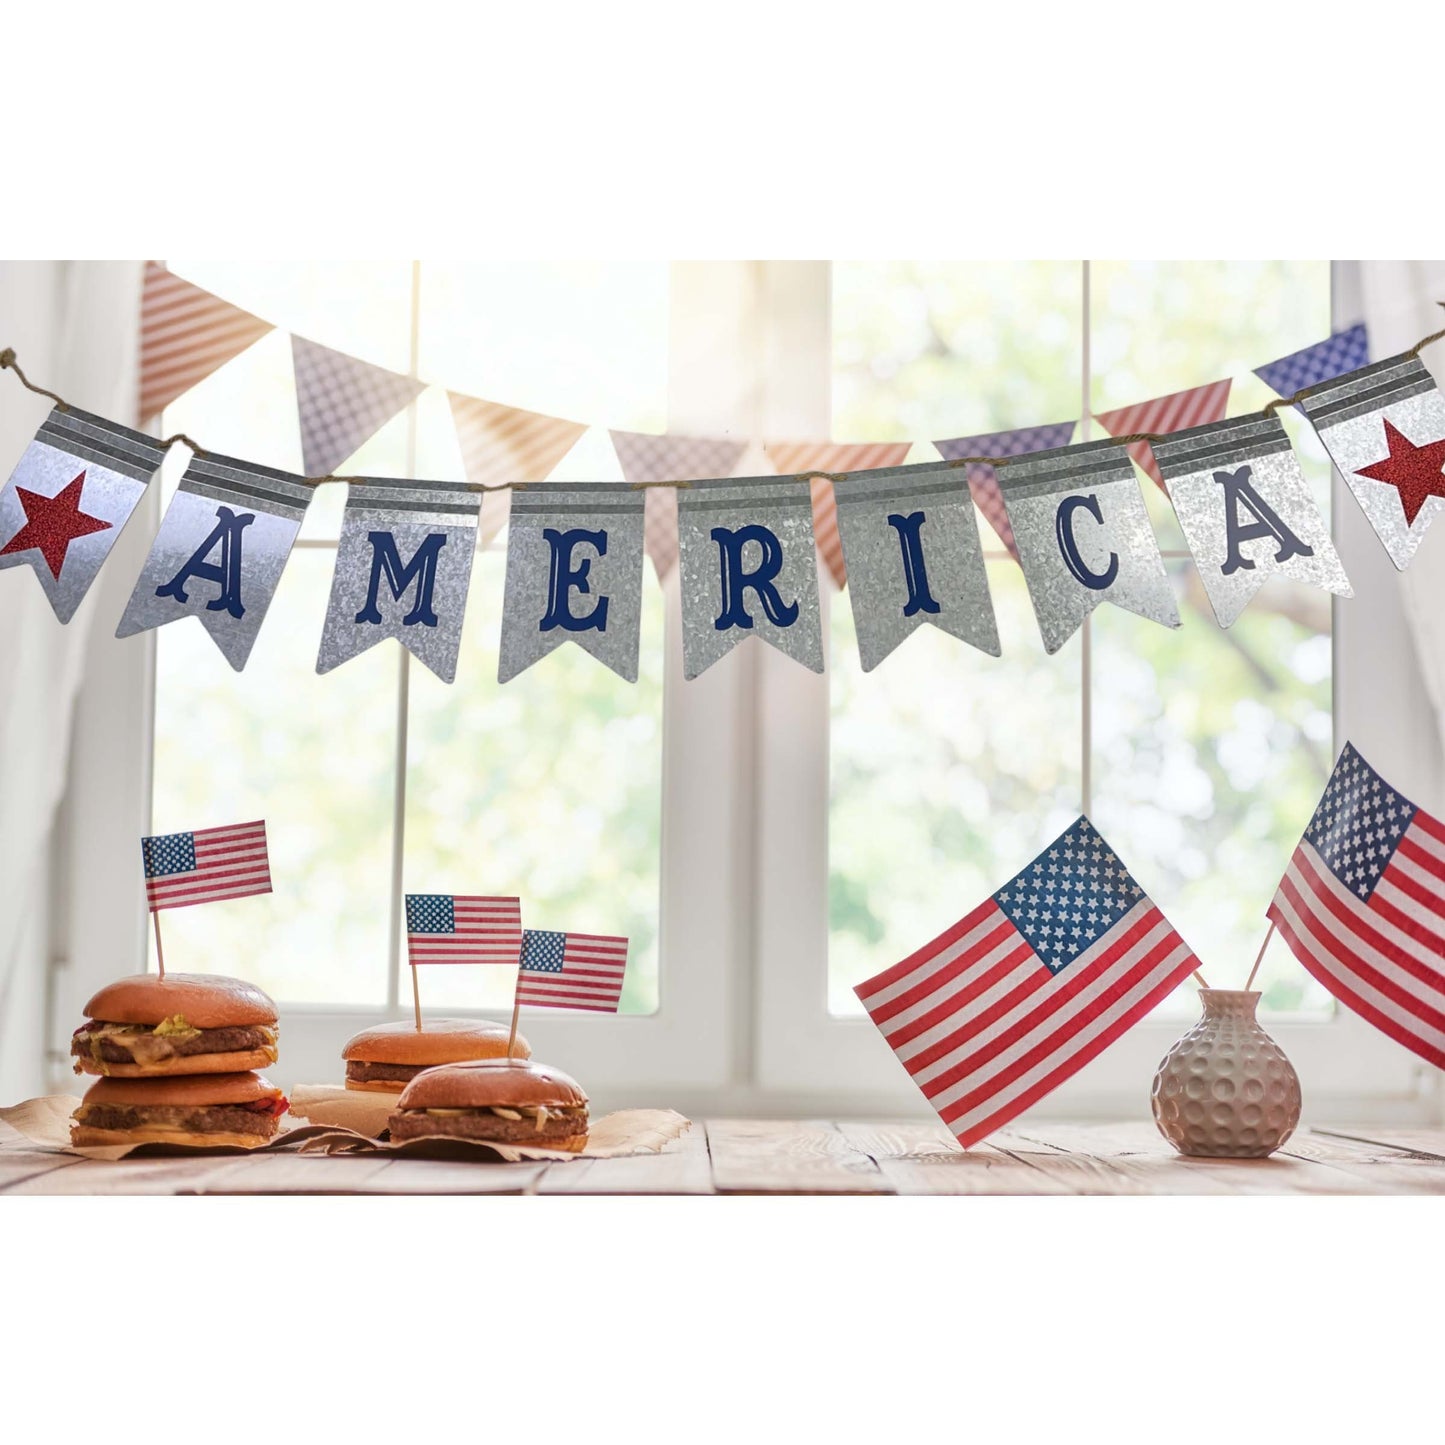 America Metal Hanging Banner  Patriotic American Flag Wall Decor for 4th of July Holidays